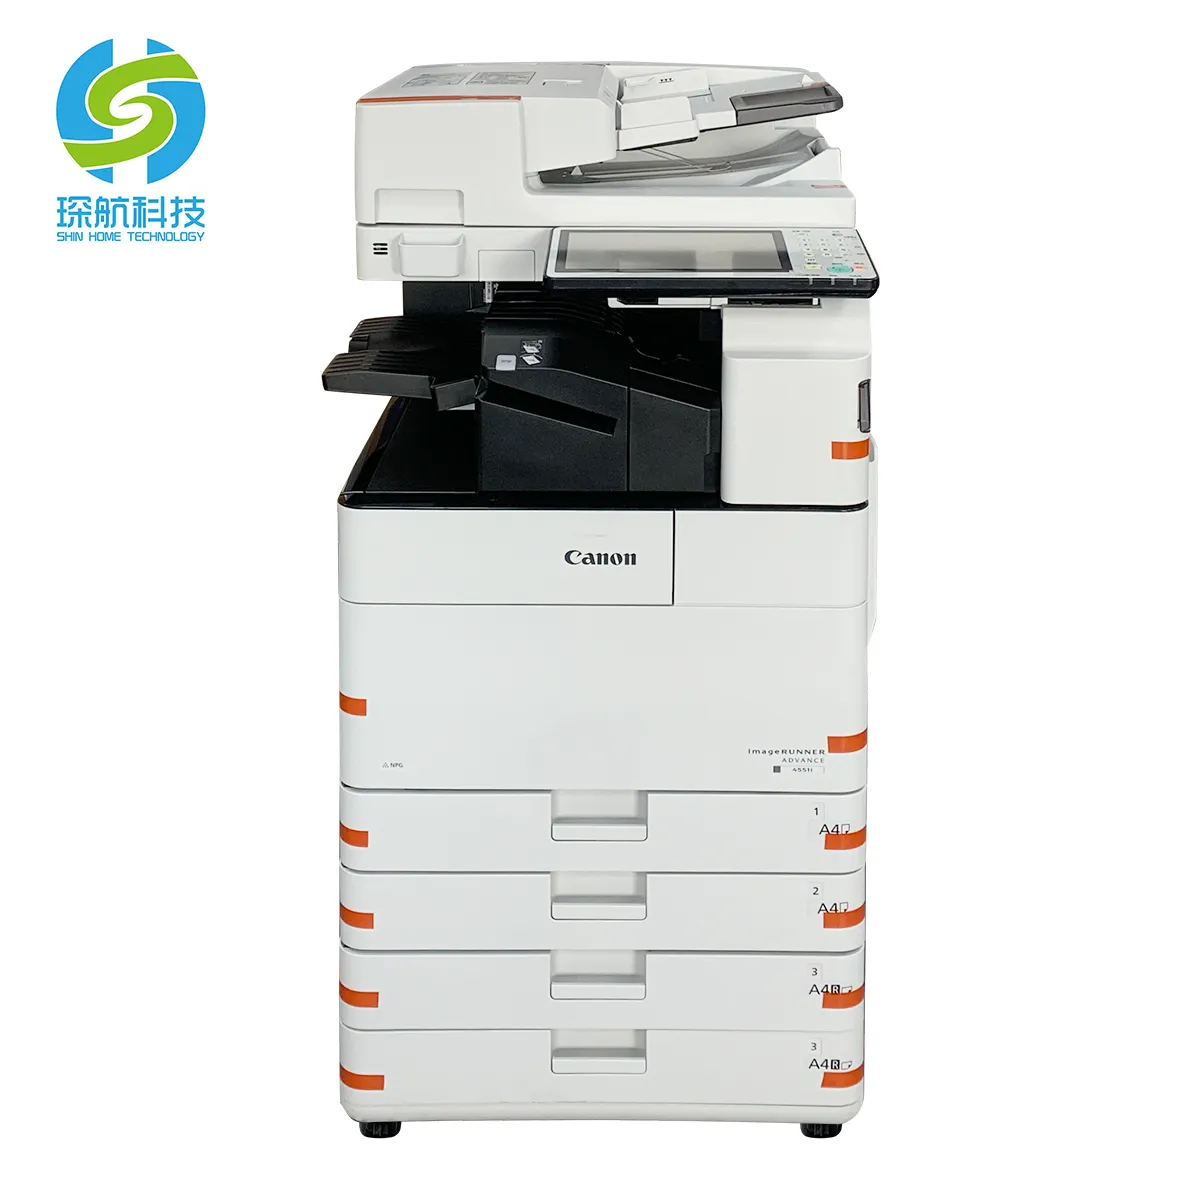 Used A3 Copier BW Machine for Canon imageRUNNER ADVANCE 4551i Monochrome Laser Multifunctional Printers